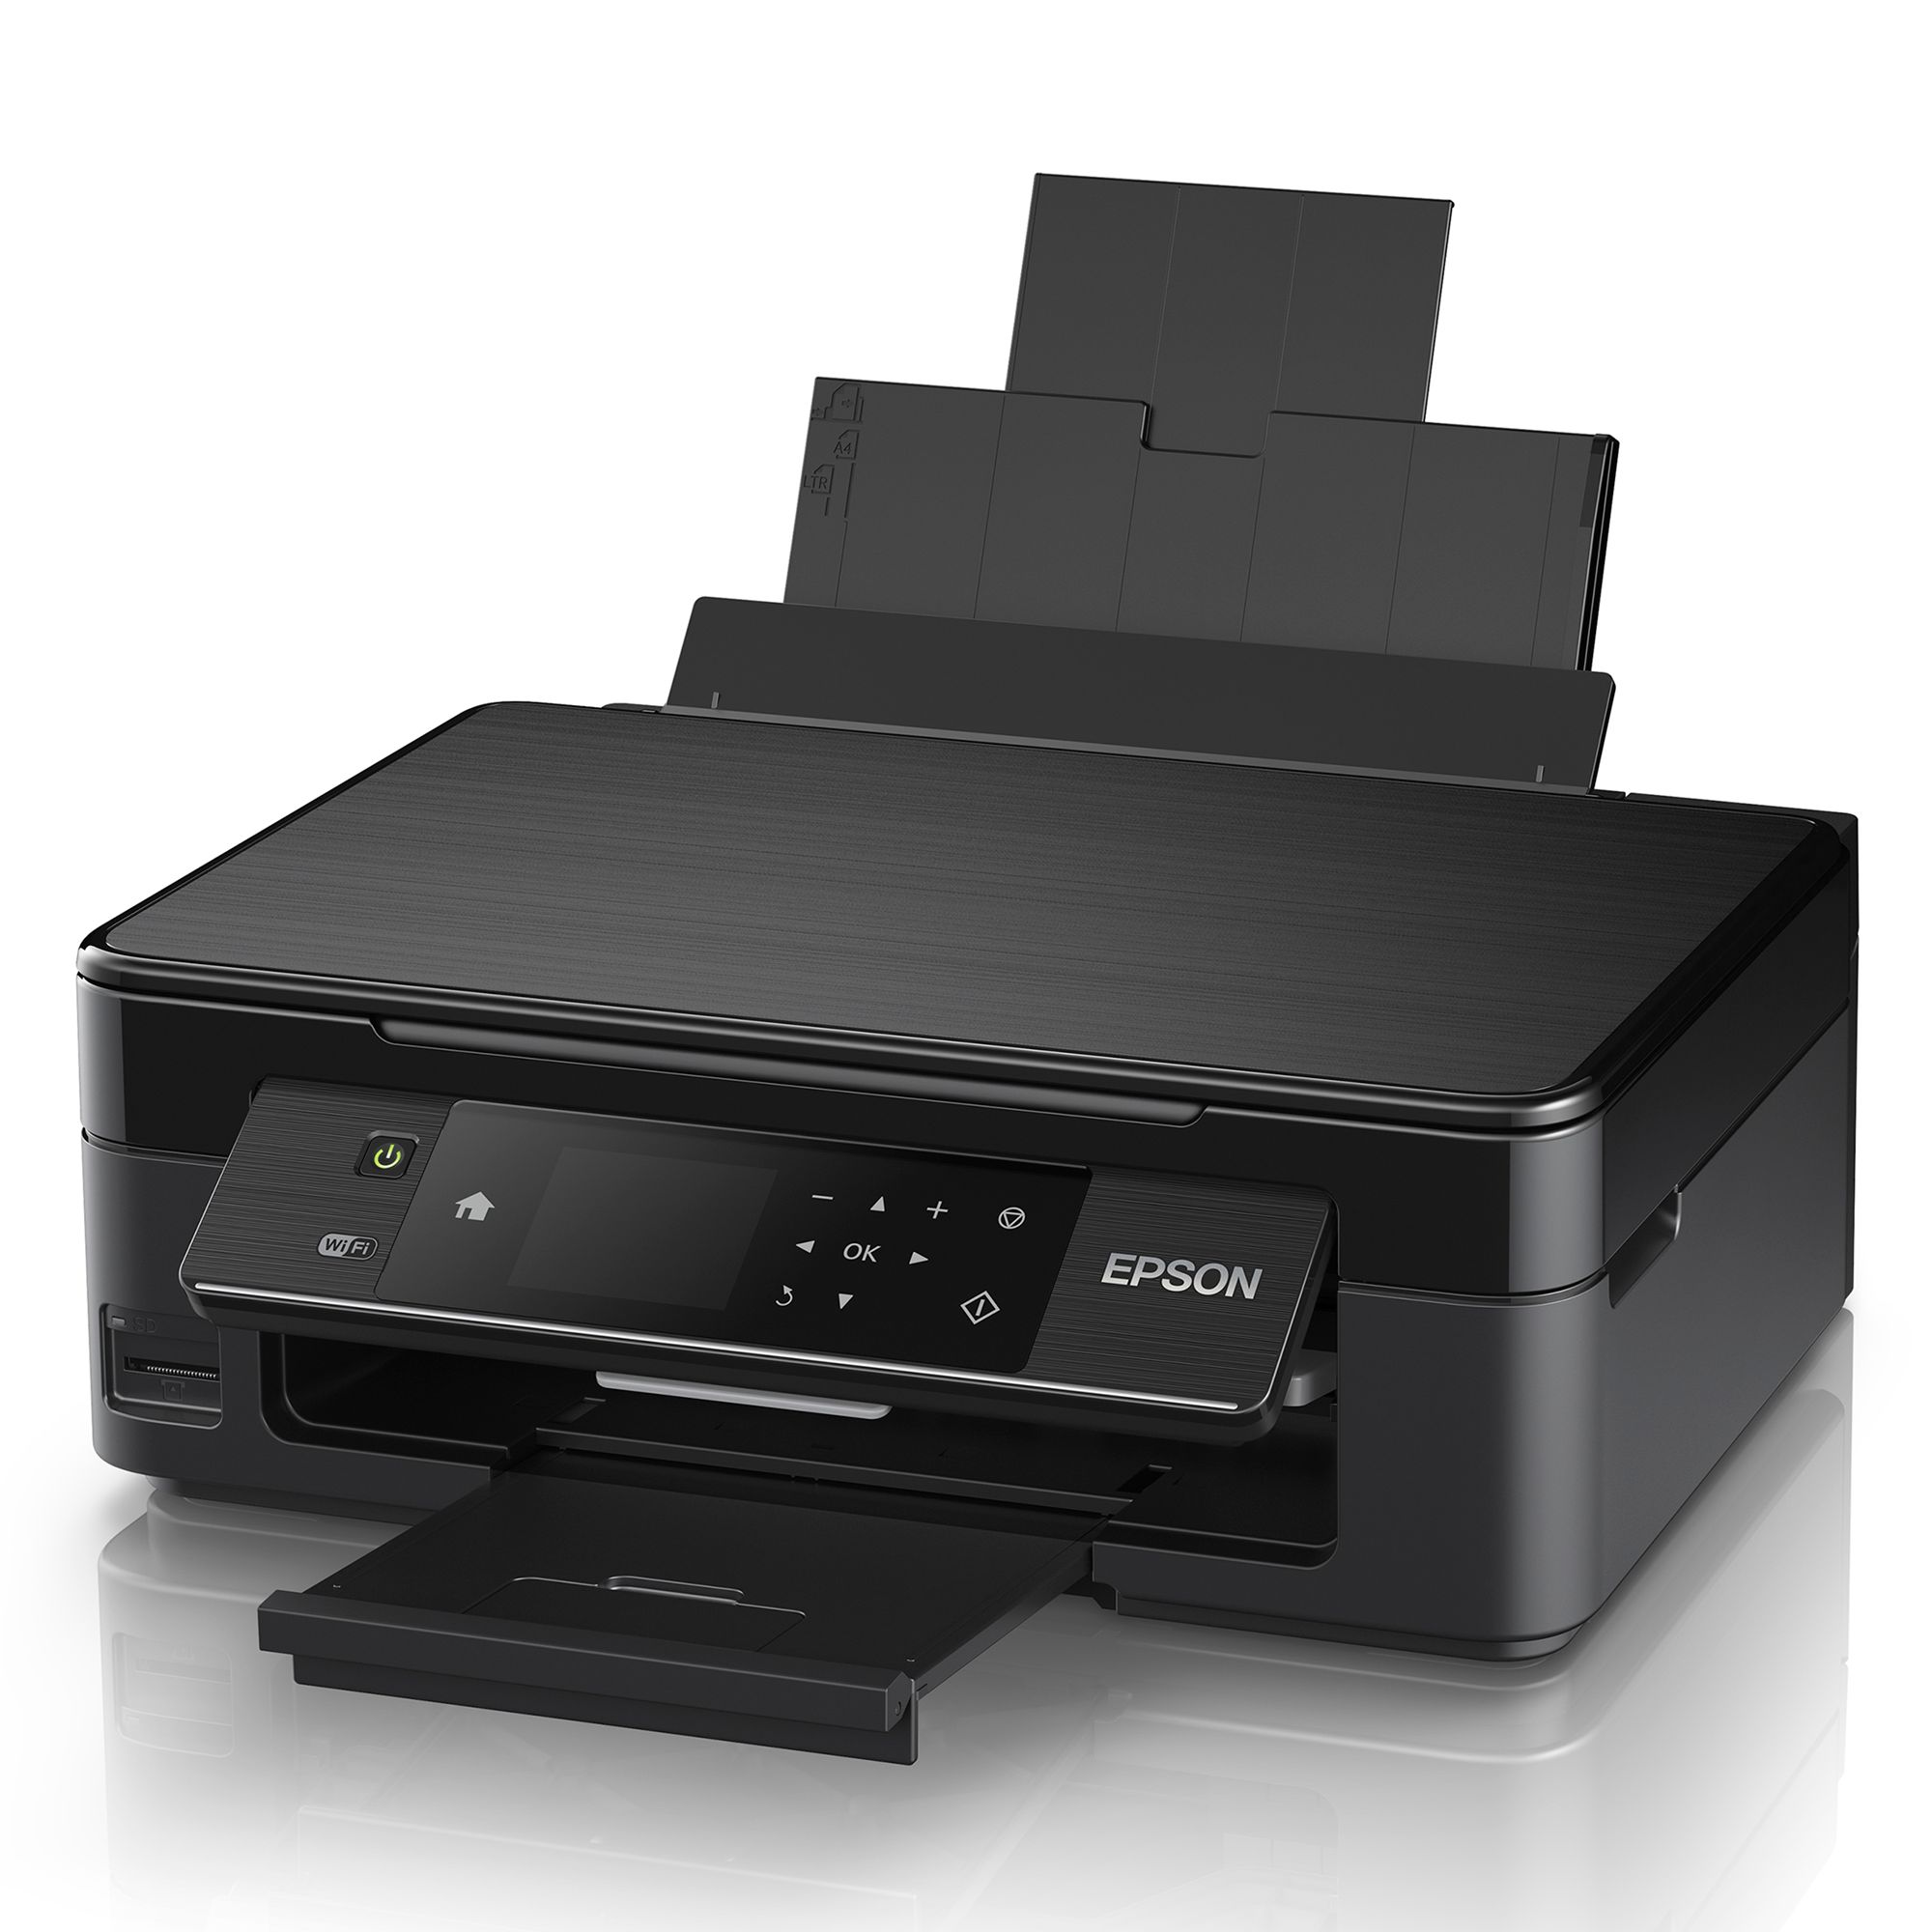 Epson Expression XP-442 Wi-Fi All-in-One Printer, Black